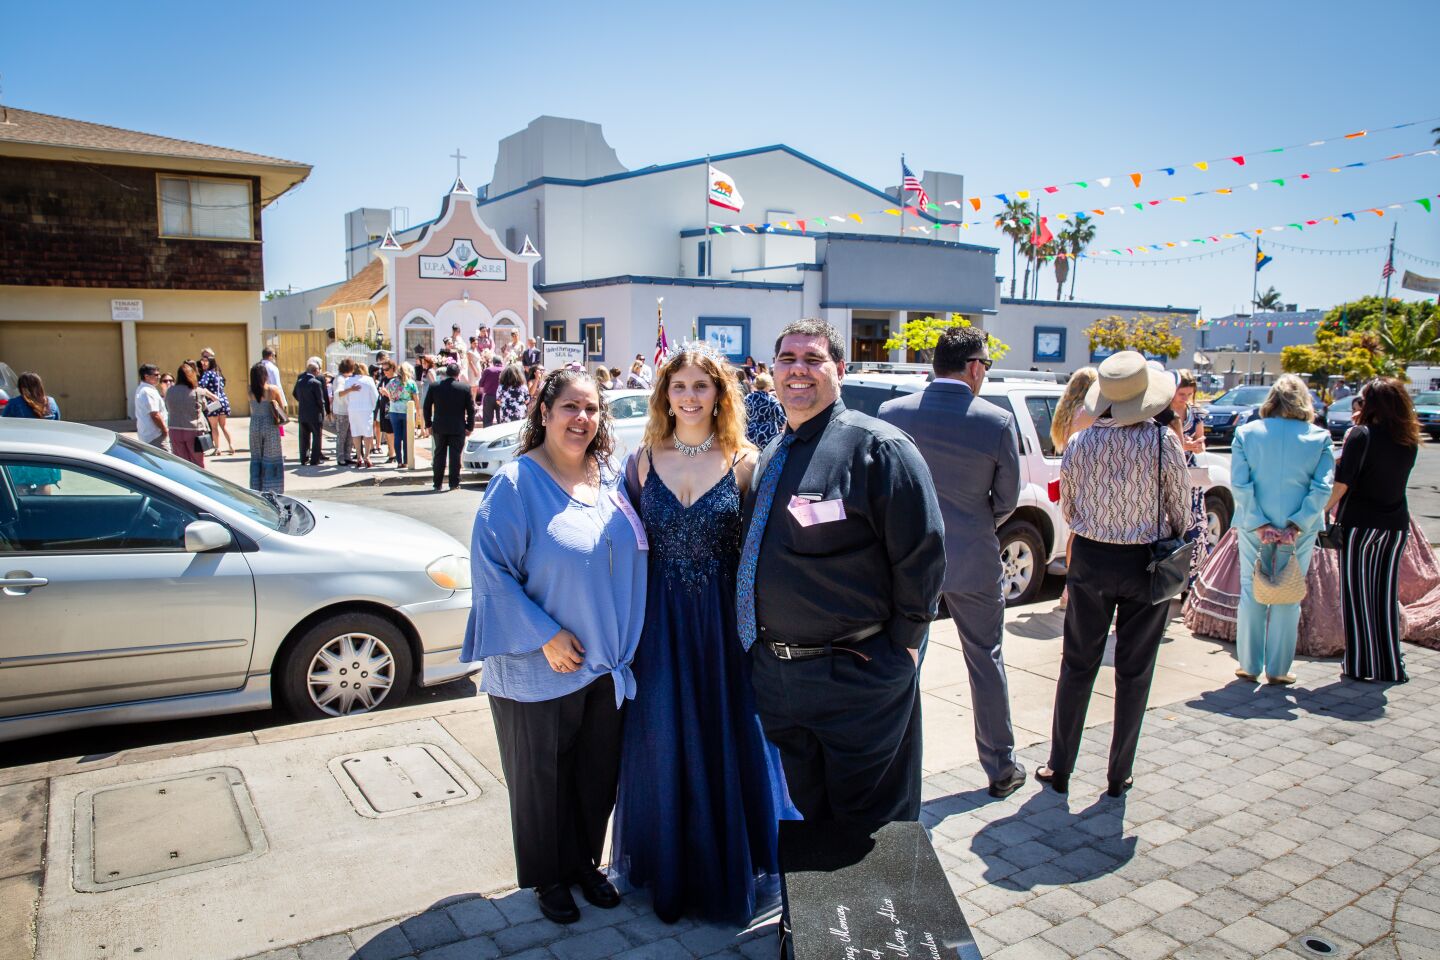 Deborah, Jenavieve and Brian Dutra attend the Festa do Espirito Santo ceremonies at the United Portuguese Society of the Holy Spirit in Point Loma.